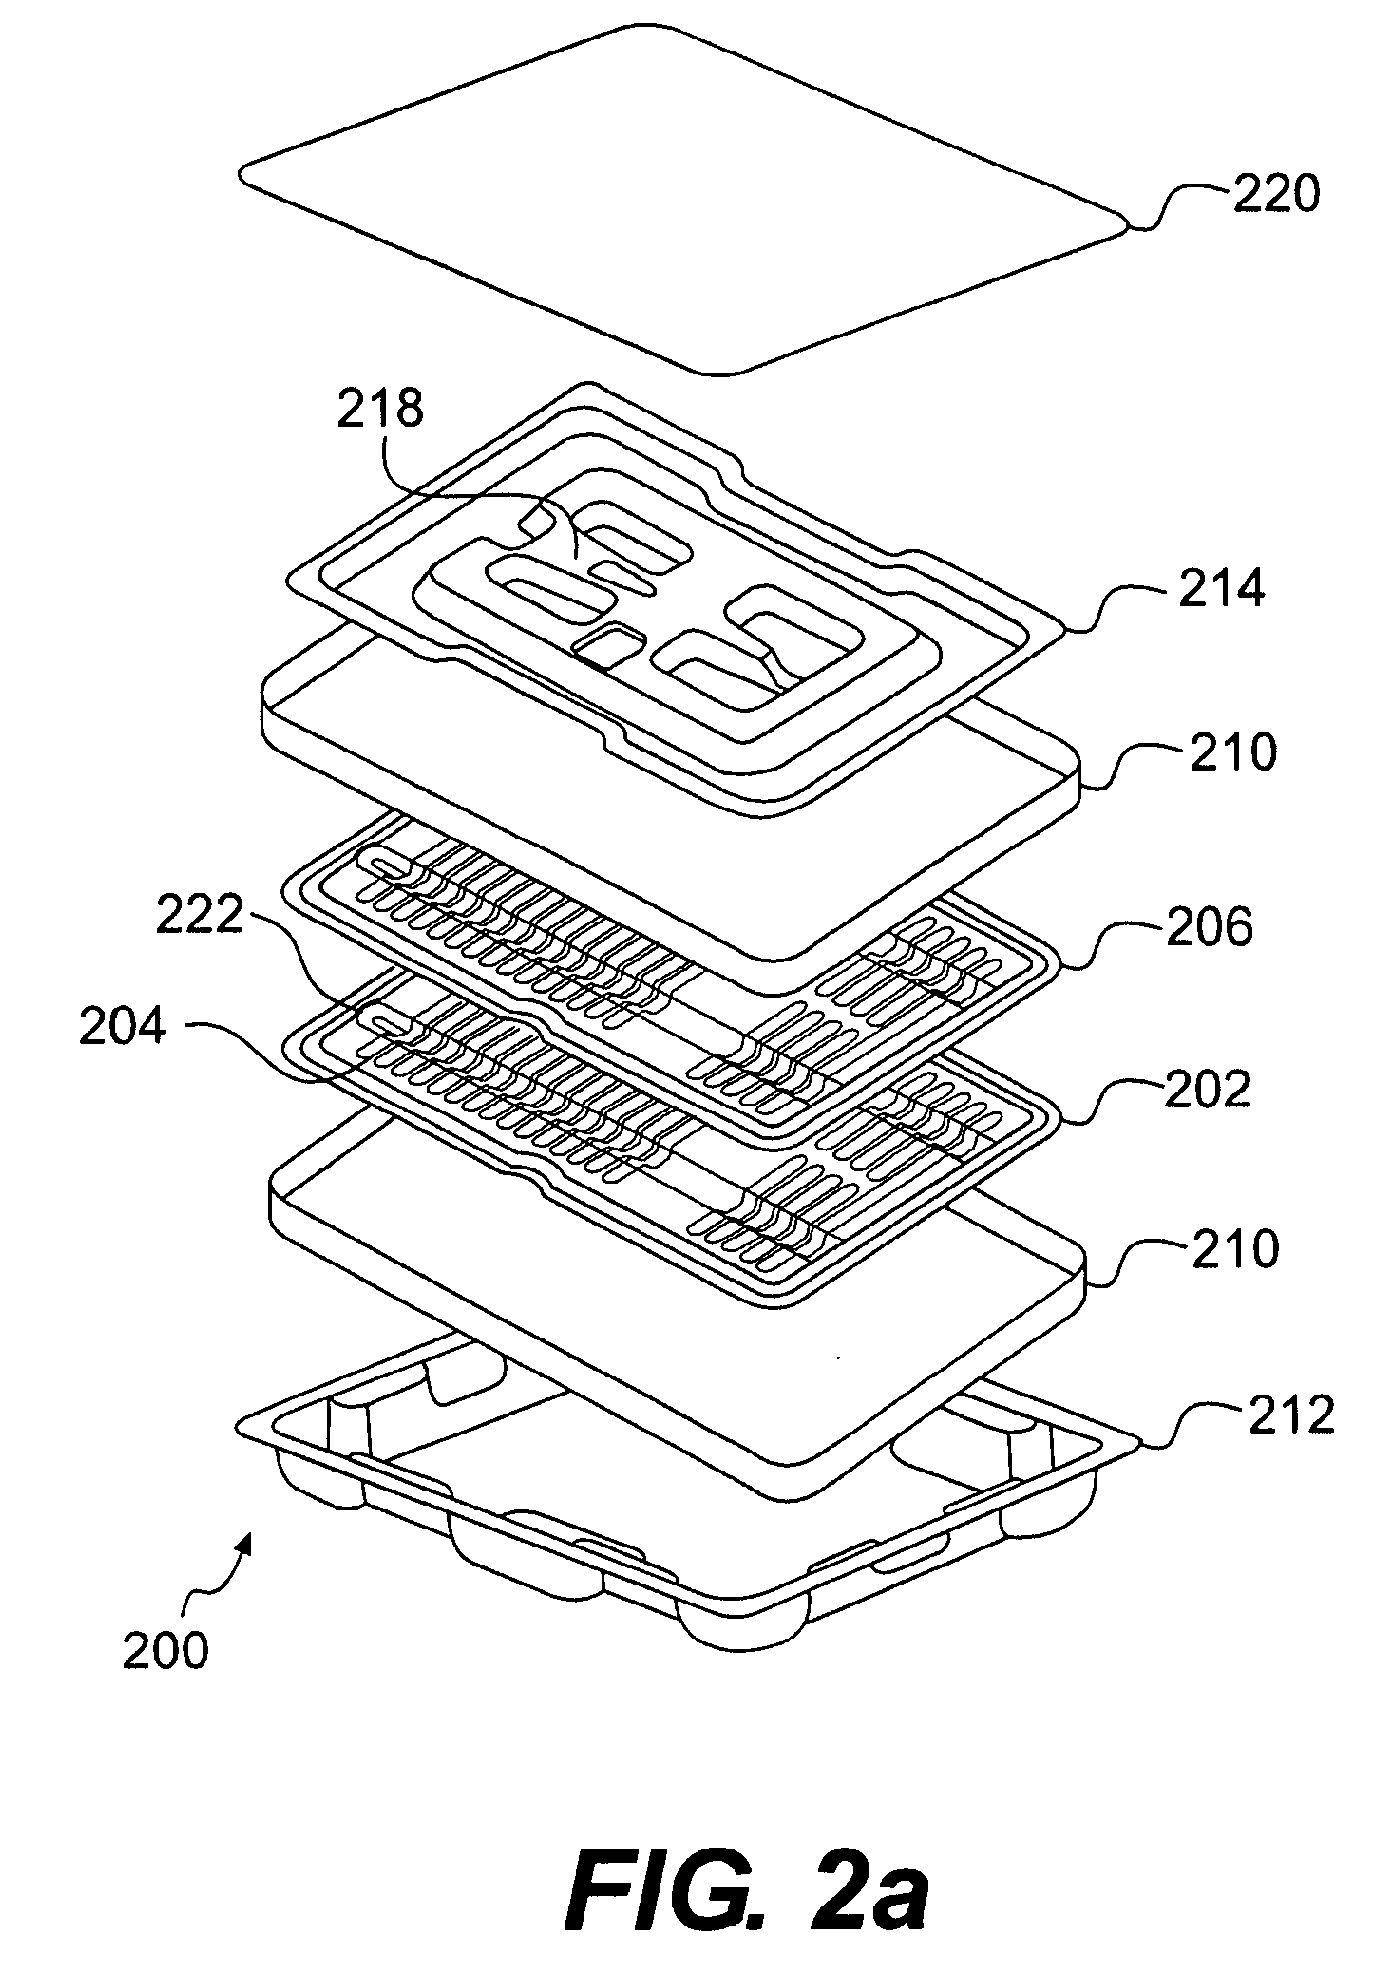 Packaging system for brachytherapy devices